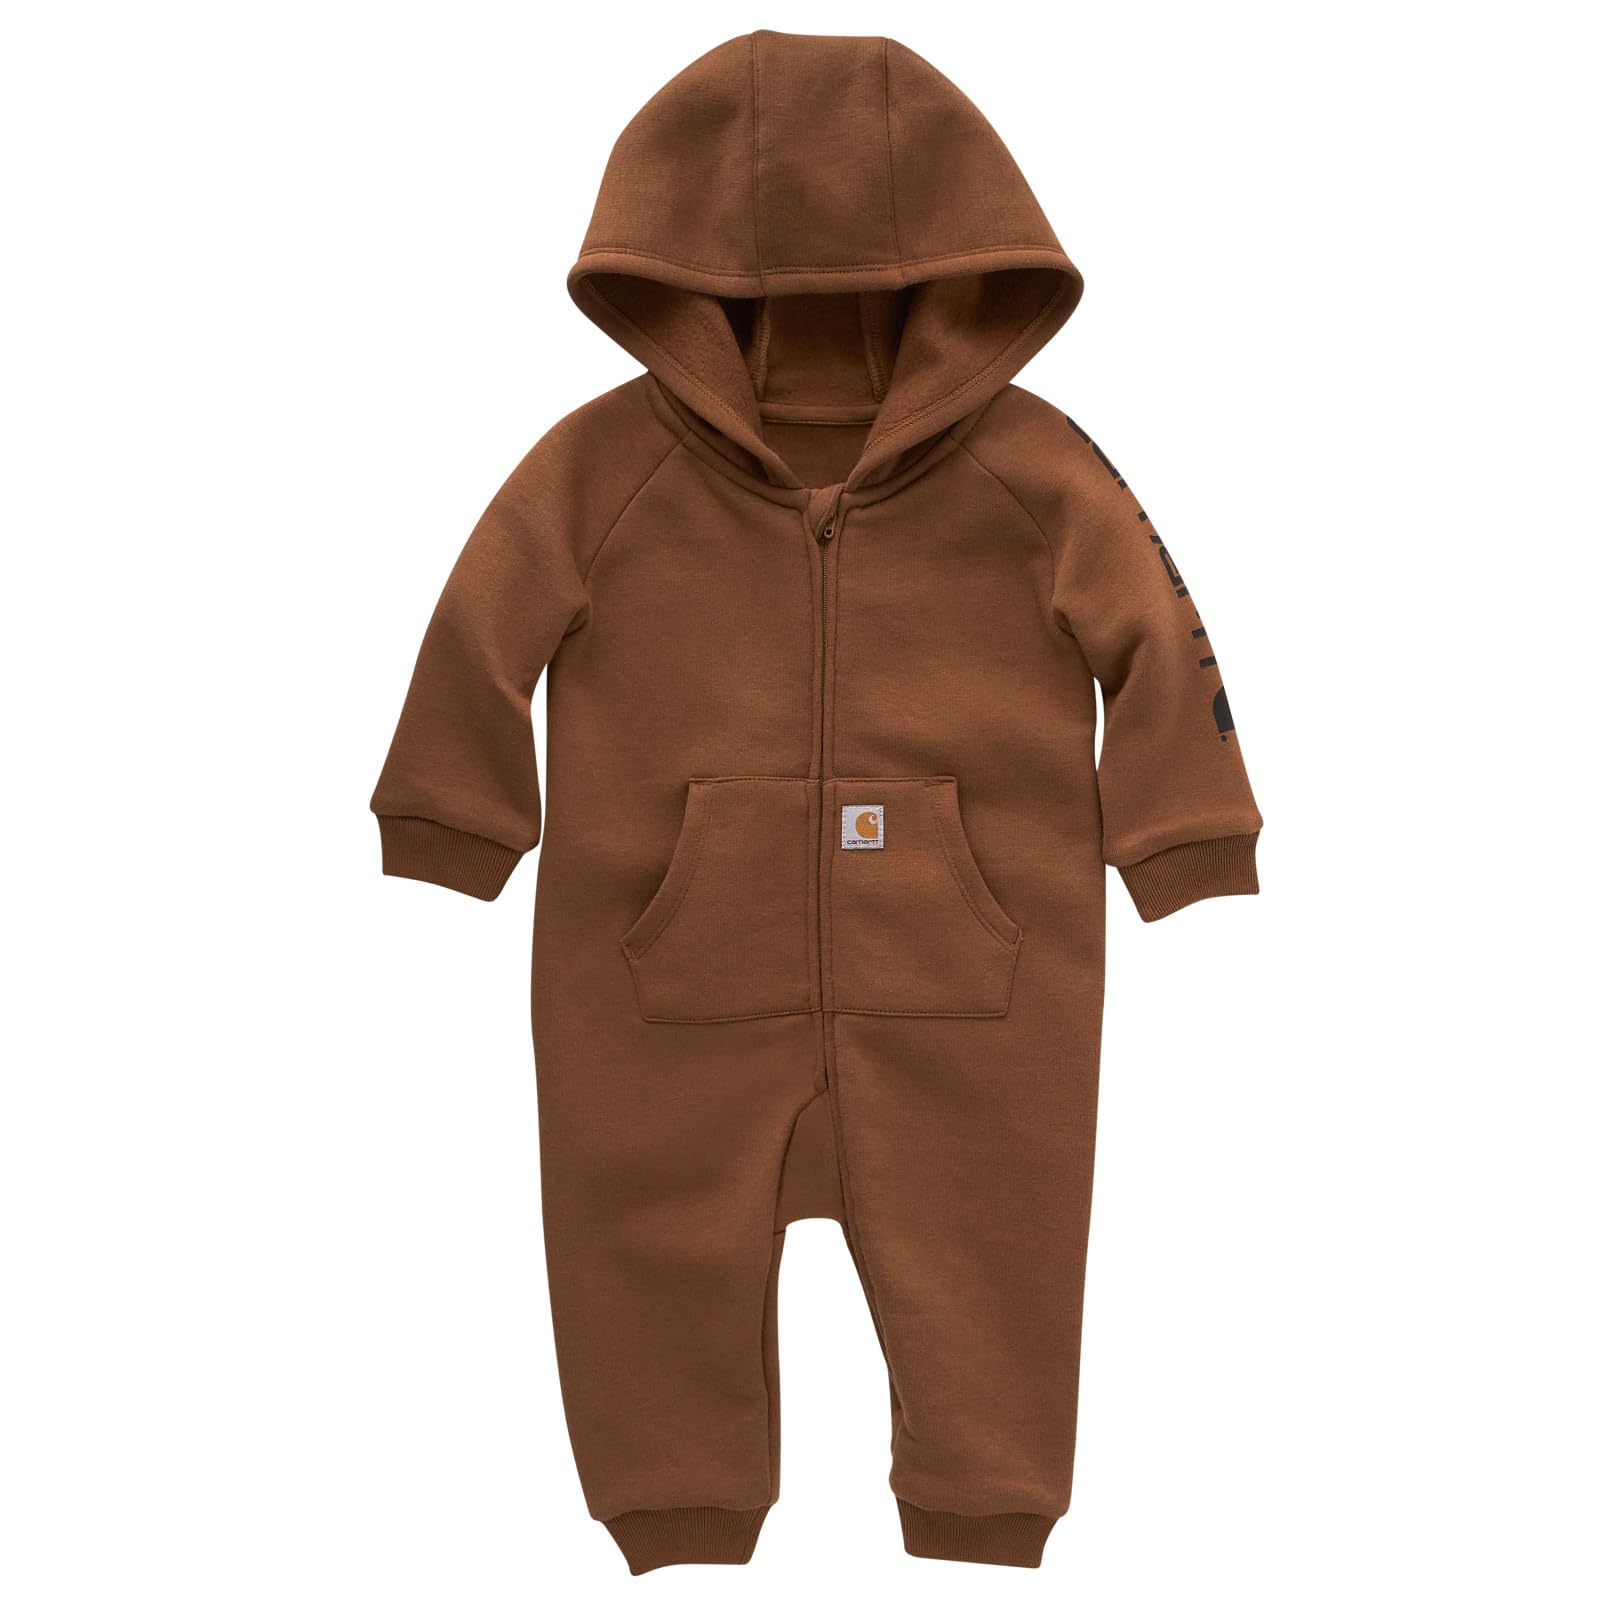 Carhartt mens Long-sleeve Zip-front Hooded Coverall